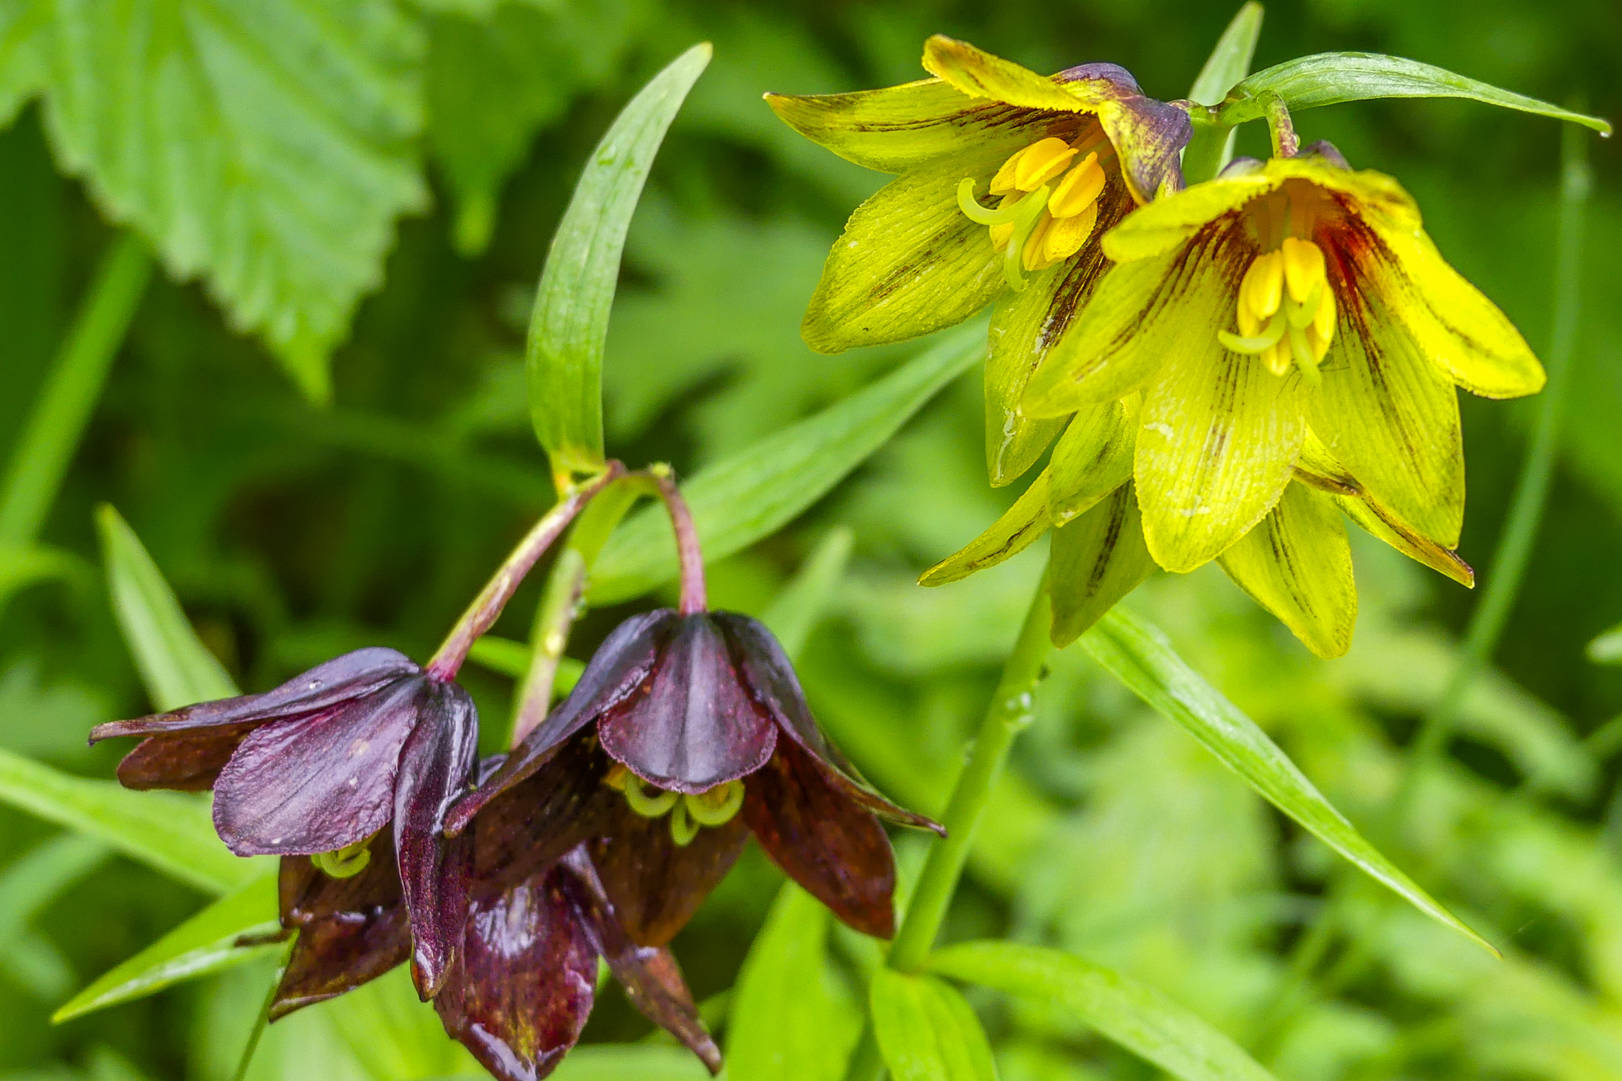 Chocolate lilies smells fetid (unlike most flowers) and is pollinated by flies. (Courtesy Photo | Kerry Howard)